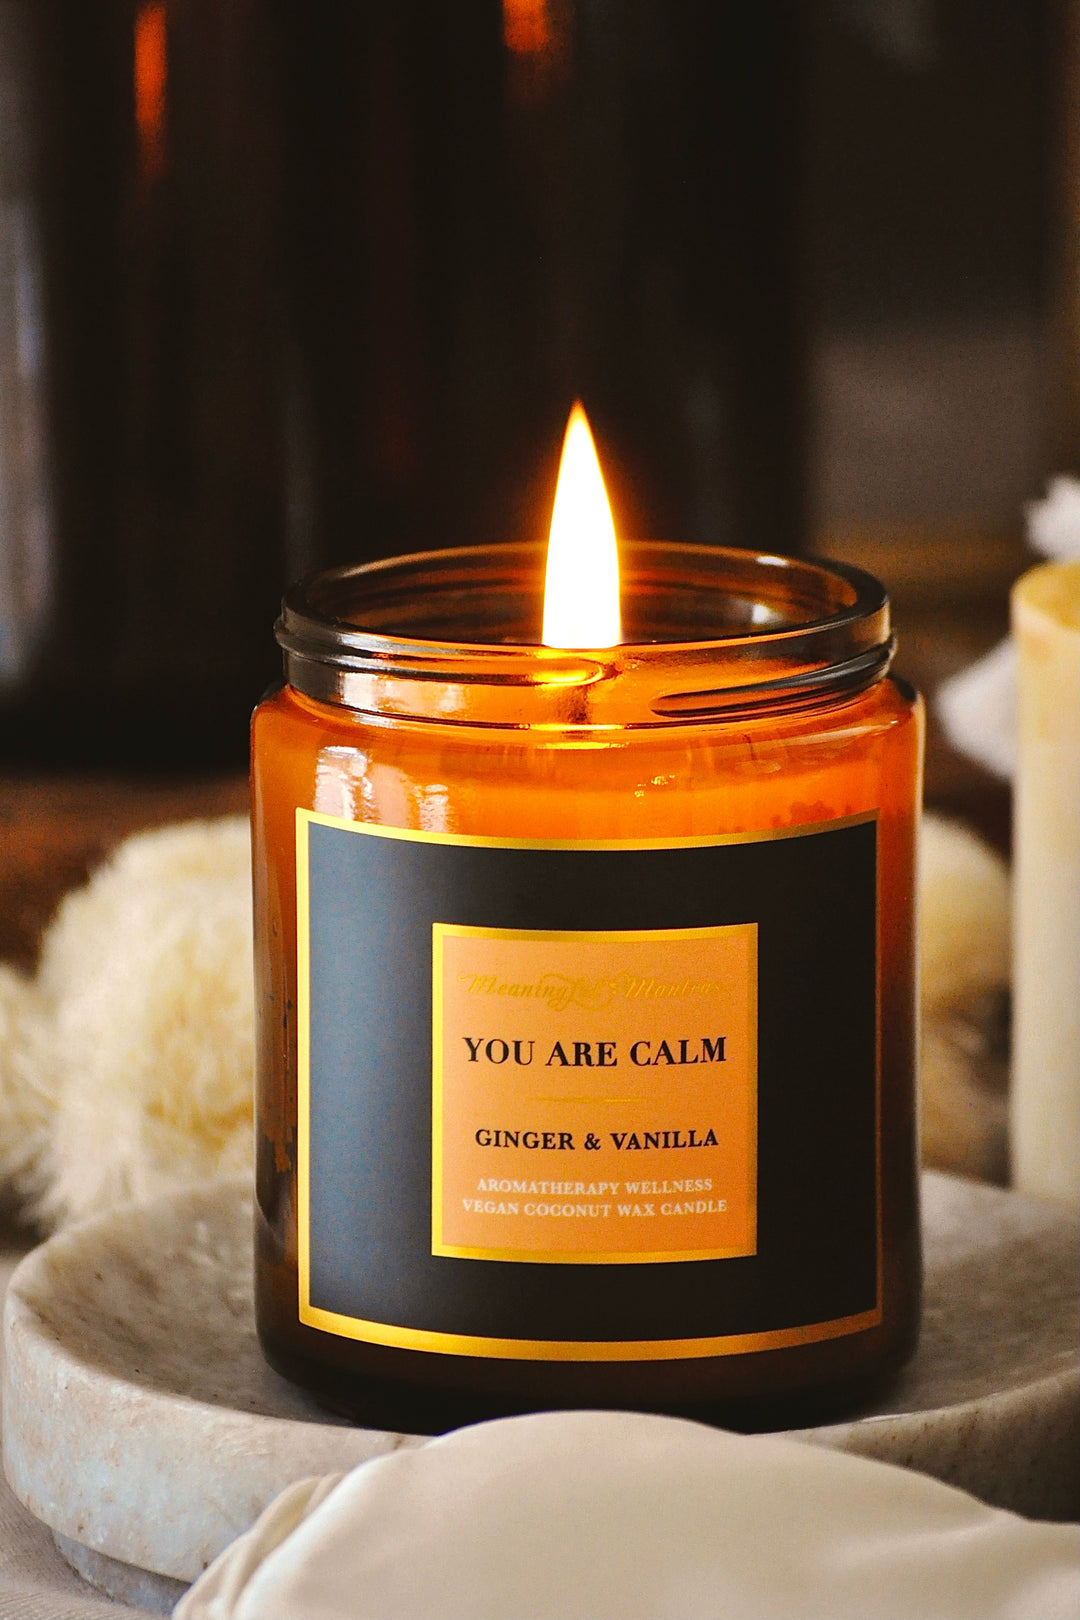 You Are Calm Ginger Vanilla 8oz Candle